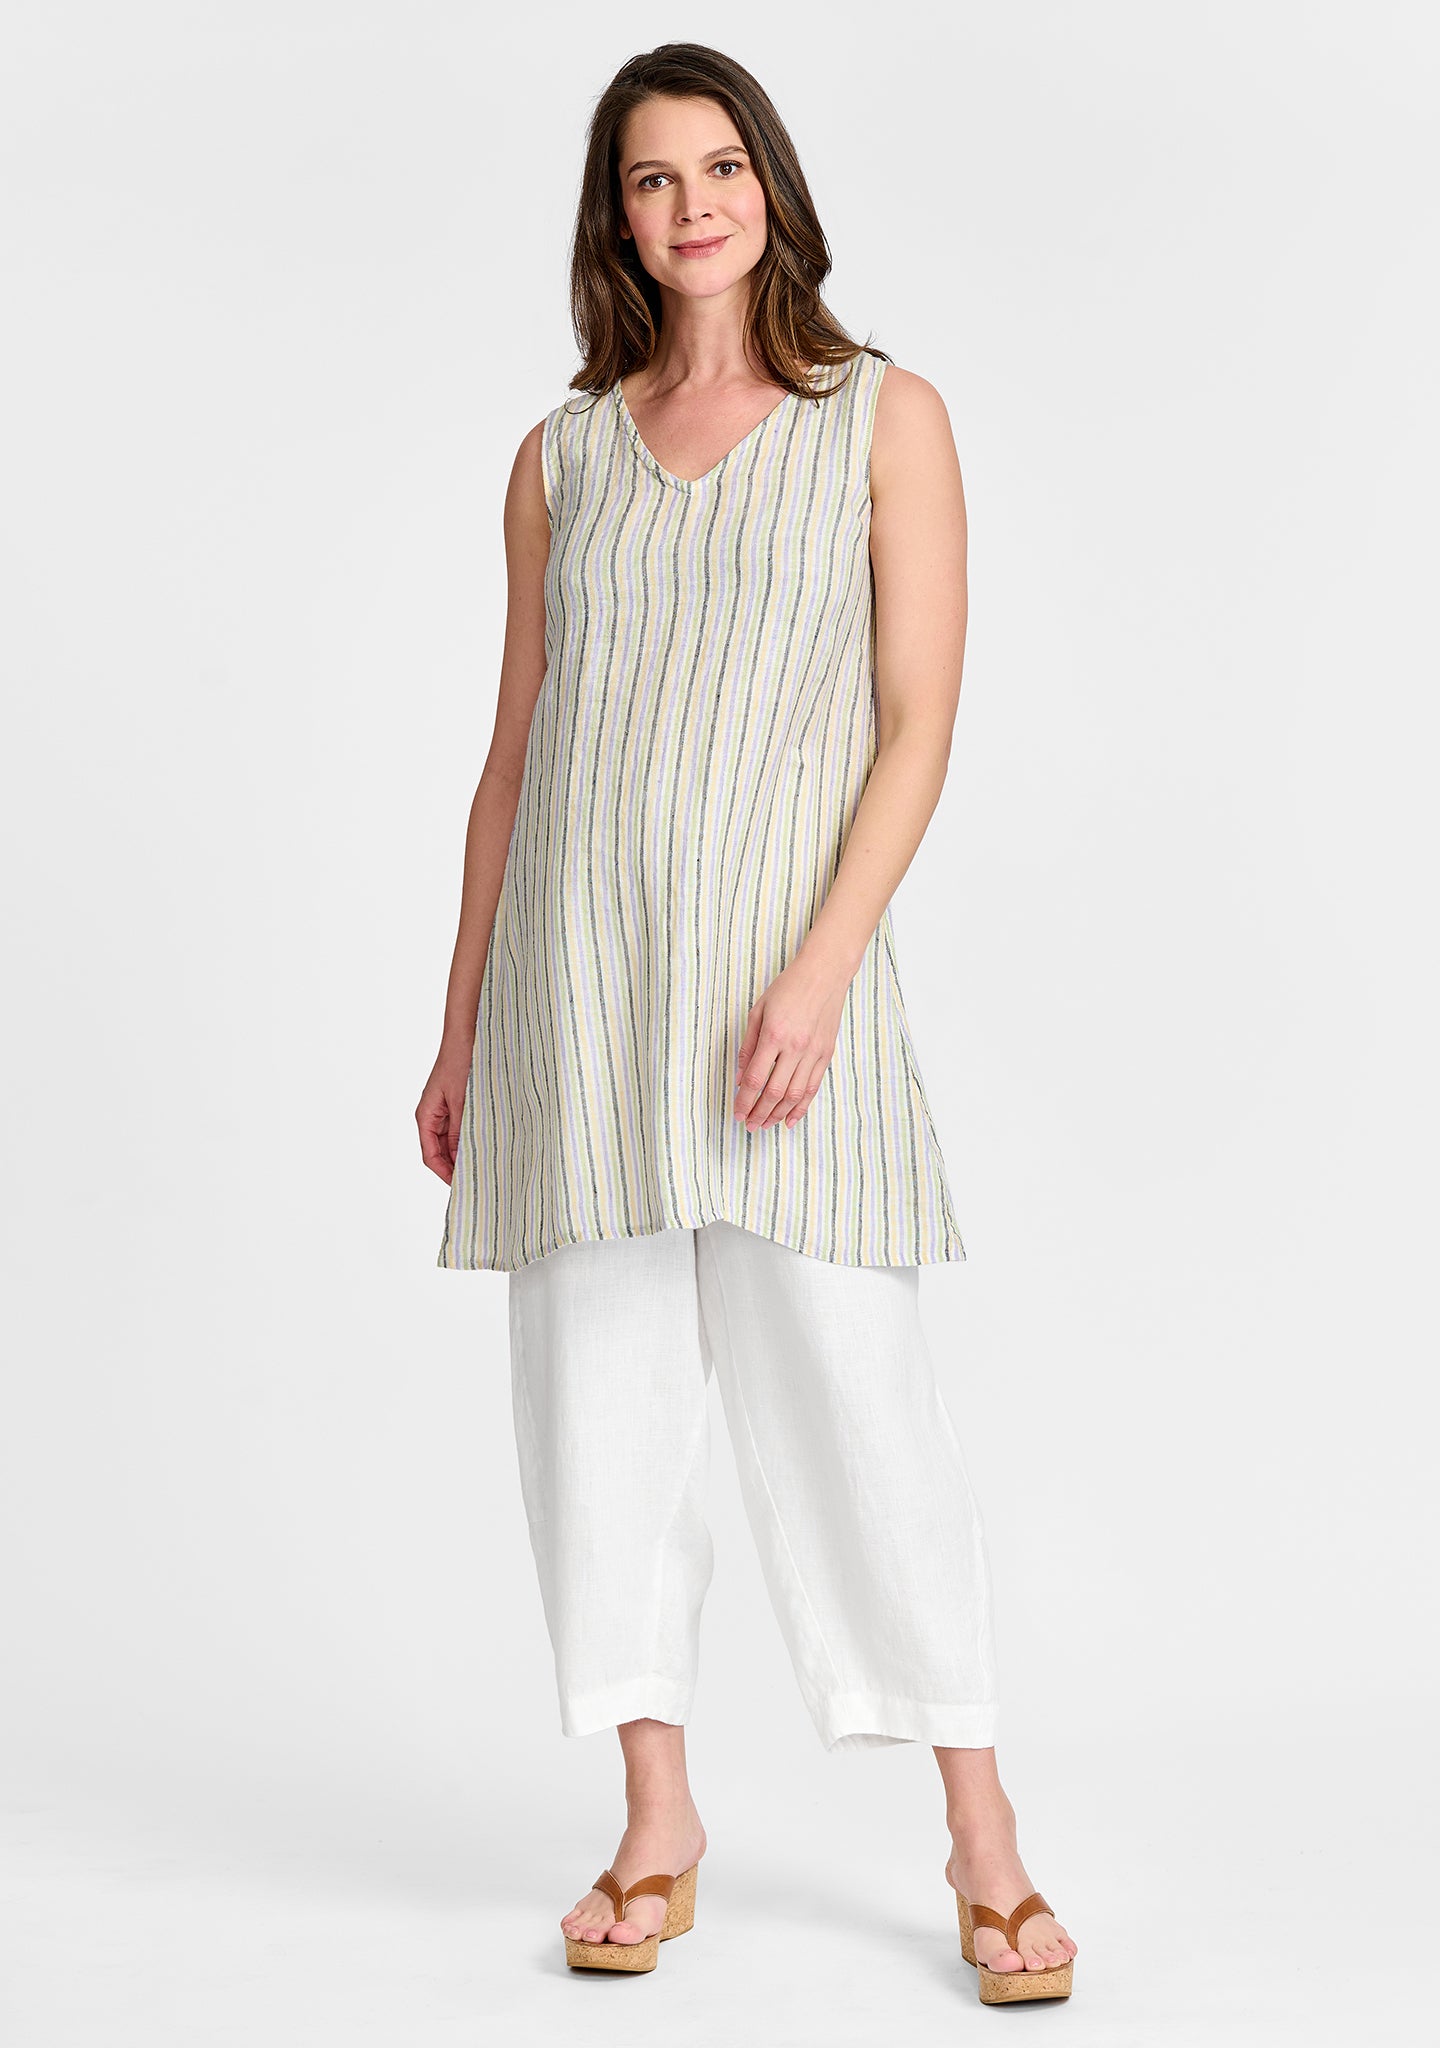 FLAX linen tank in stripe with linen pants in white